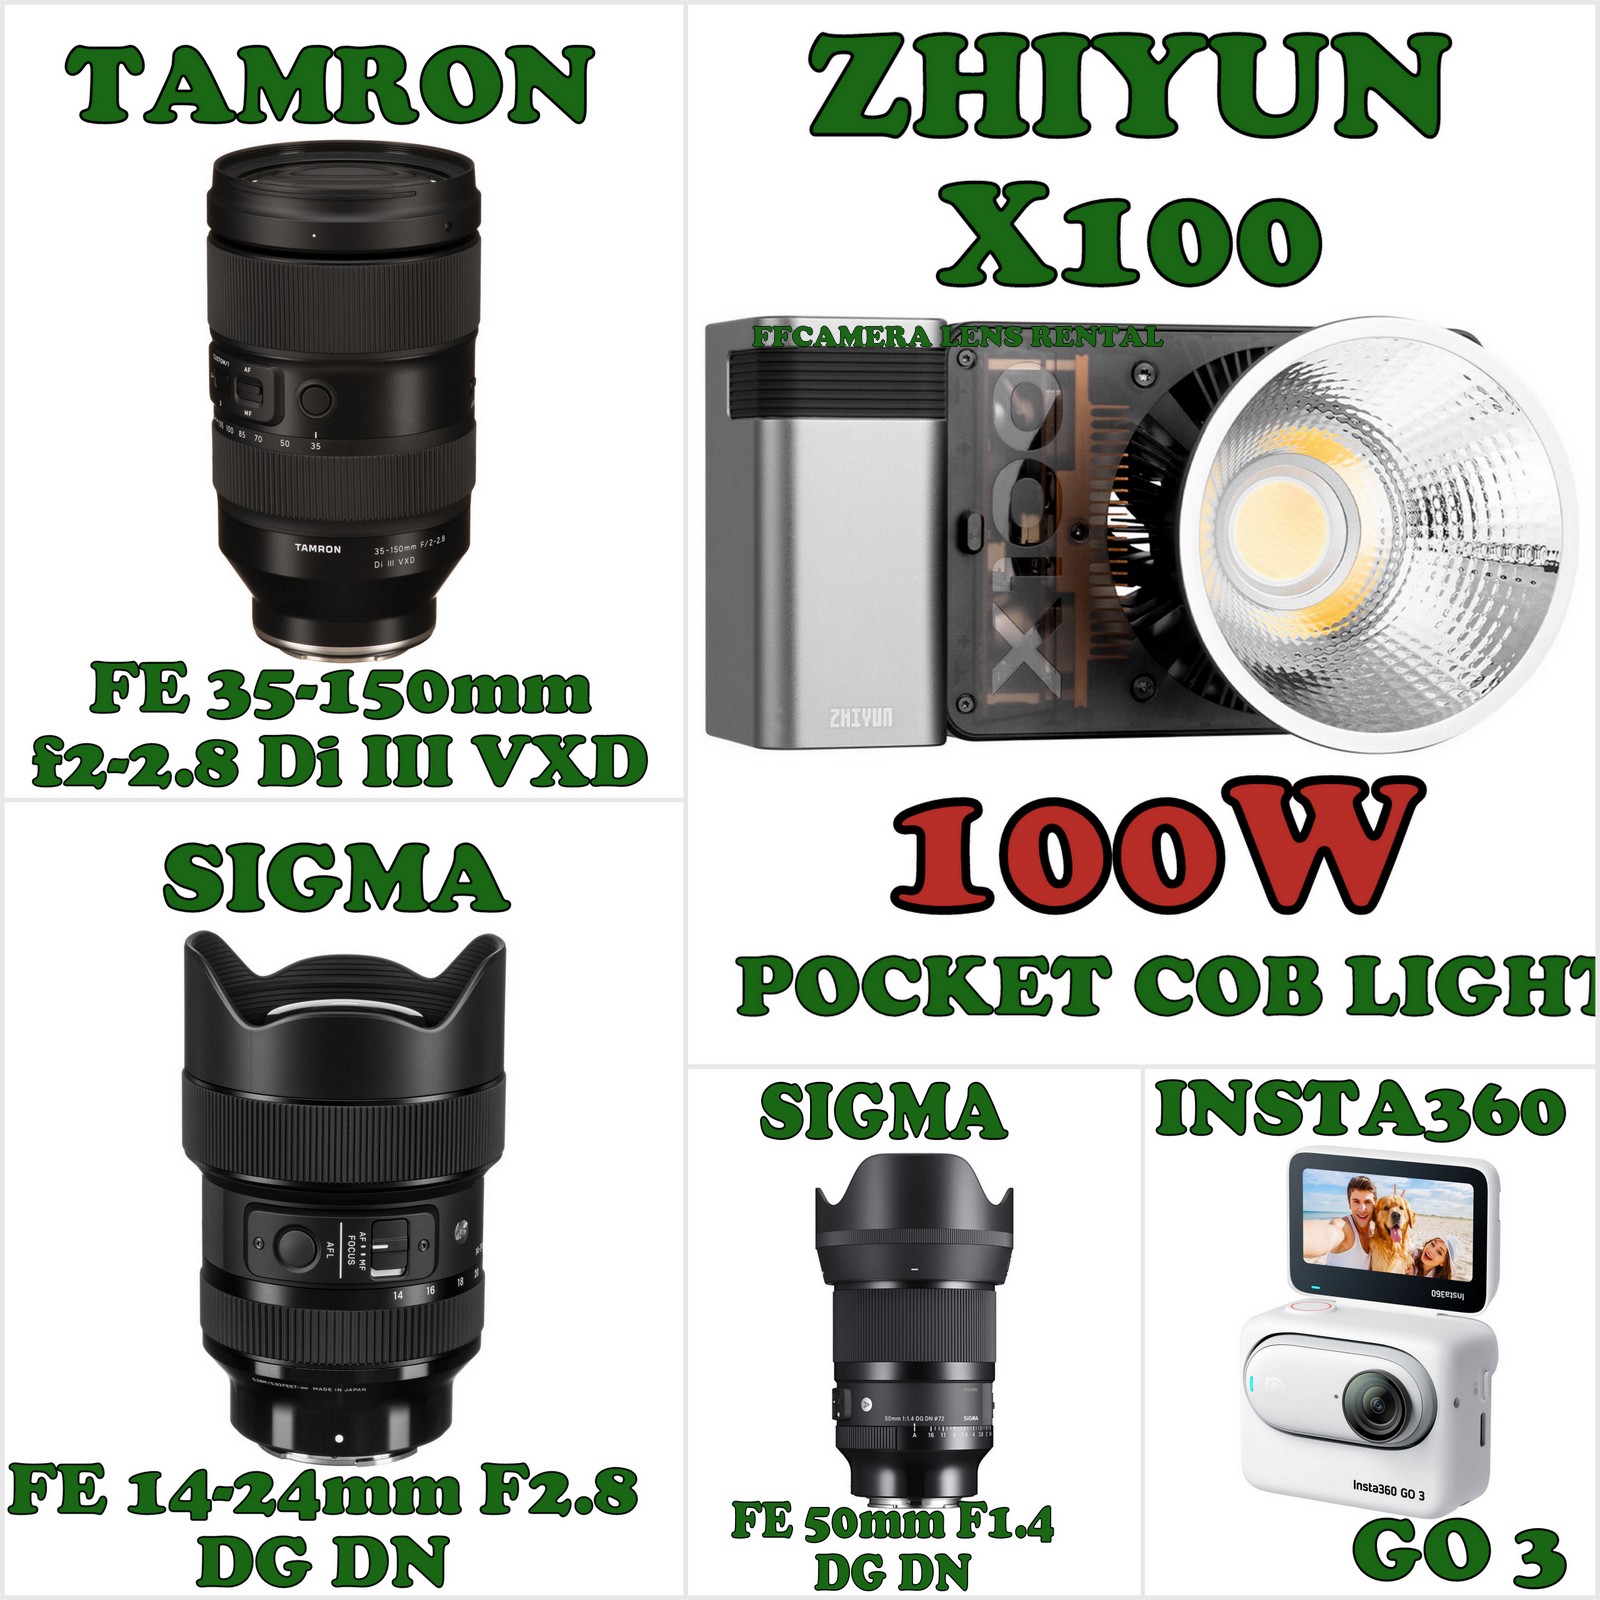 July new item available for rental. - Tamron FE 35-150mm F2-2.8 - Sigma FE 14-24mm F2.8 DG DN - Sigma FE 50mm F1.4 DG DN - Zhiyun X100 Pocket size COB light 100W Pro - Insta360 GO 3